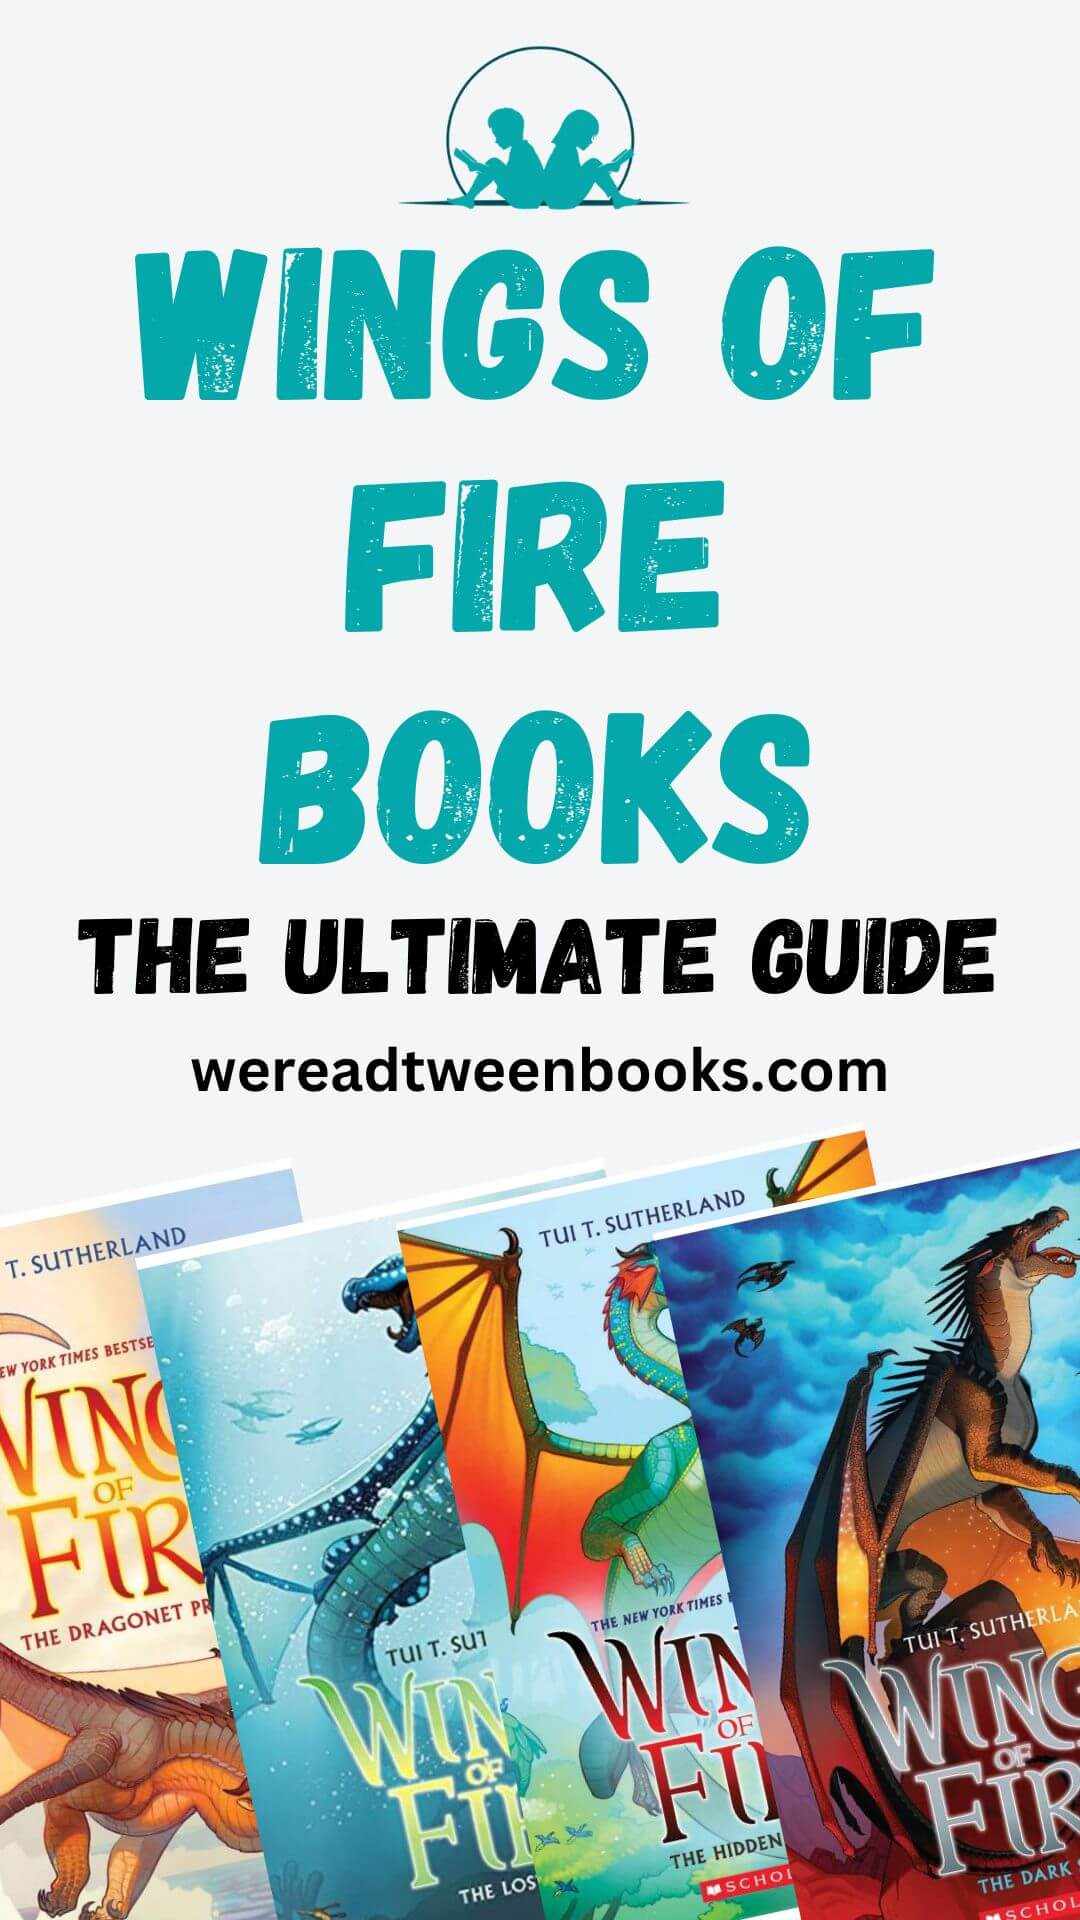 Check out the epic book list of all the Wings of Fire books in order on We Read Tween Books.